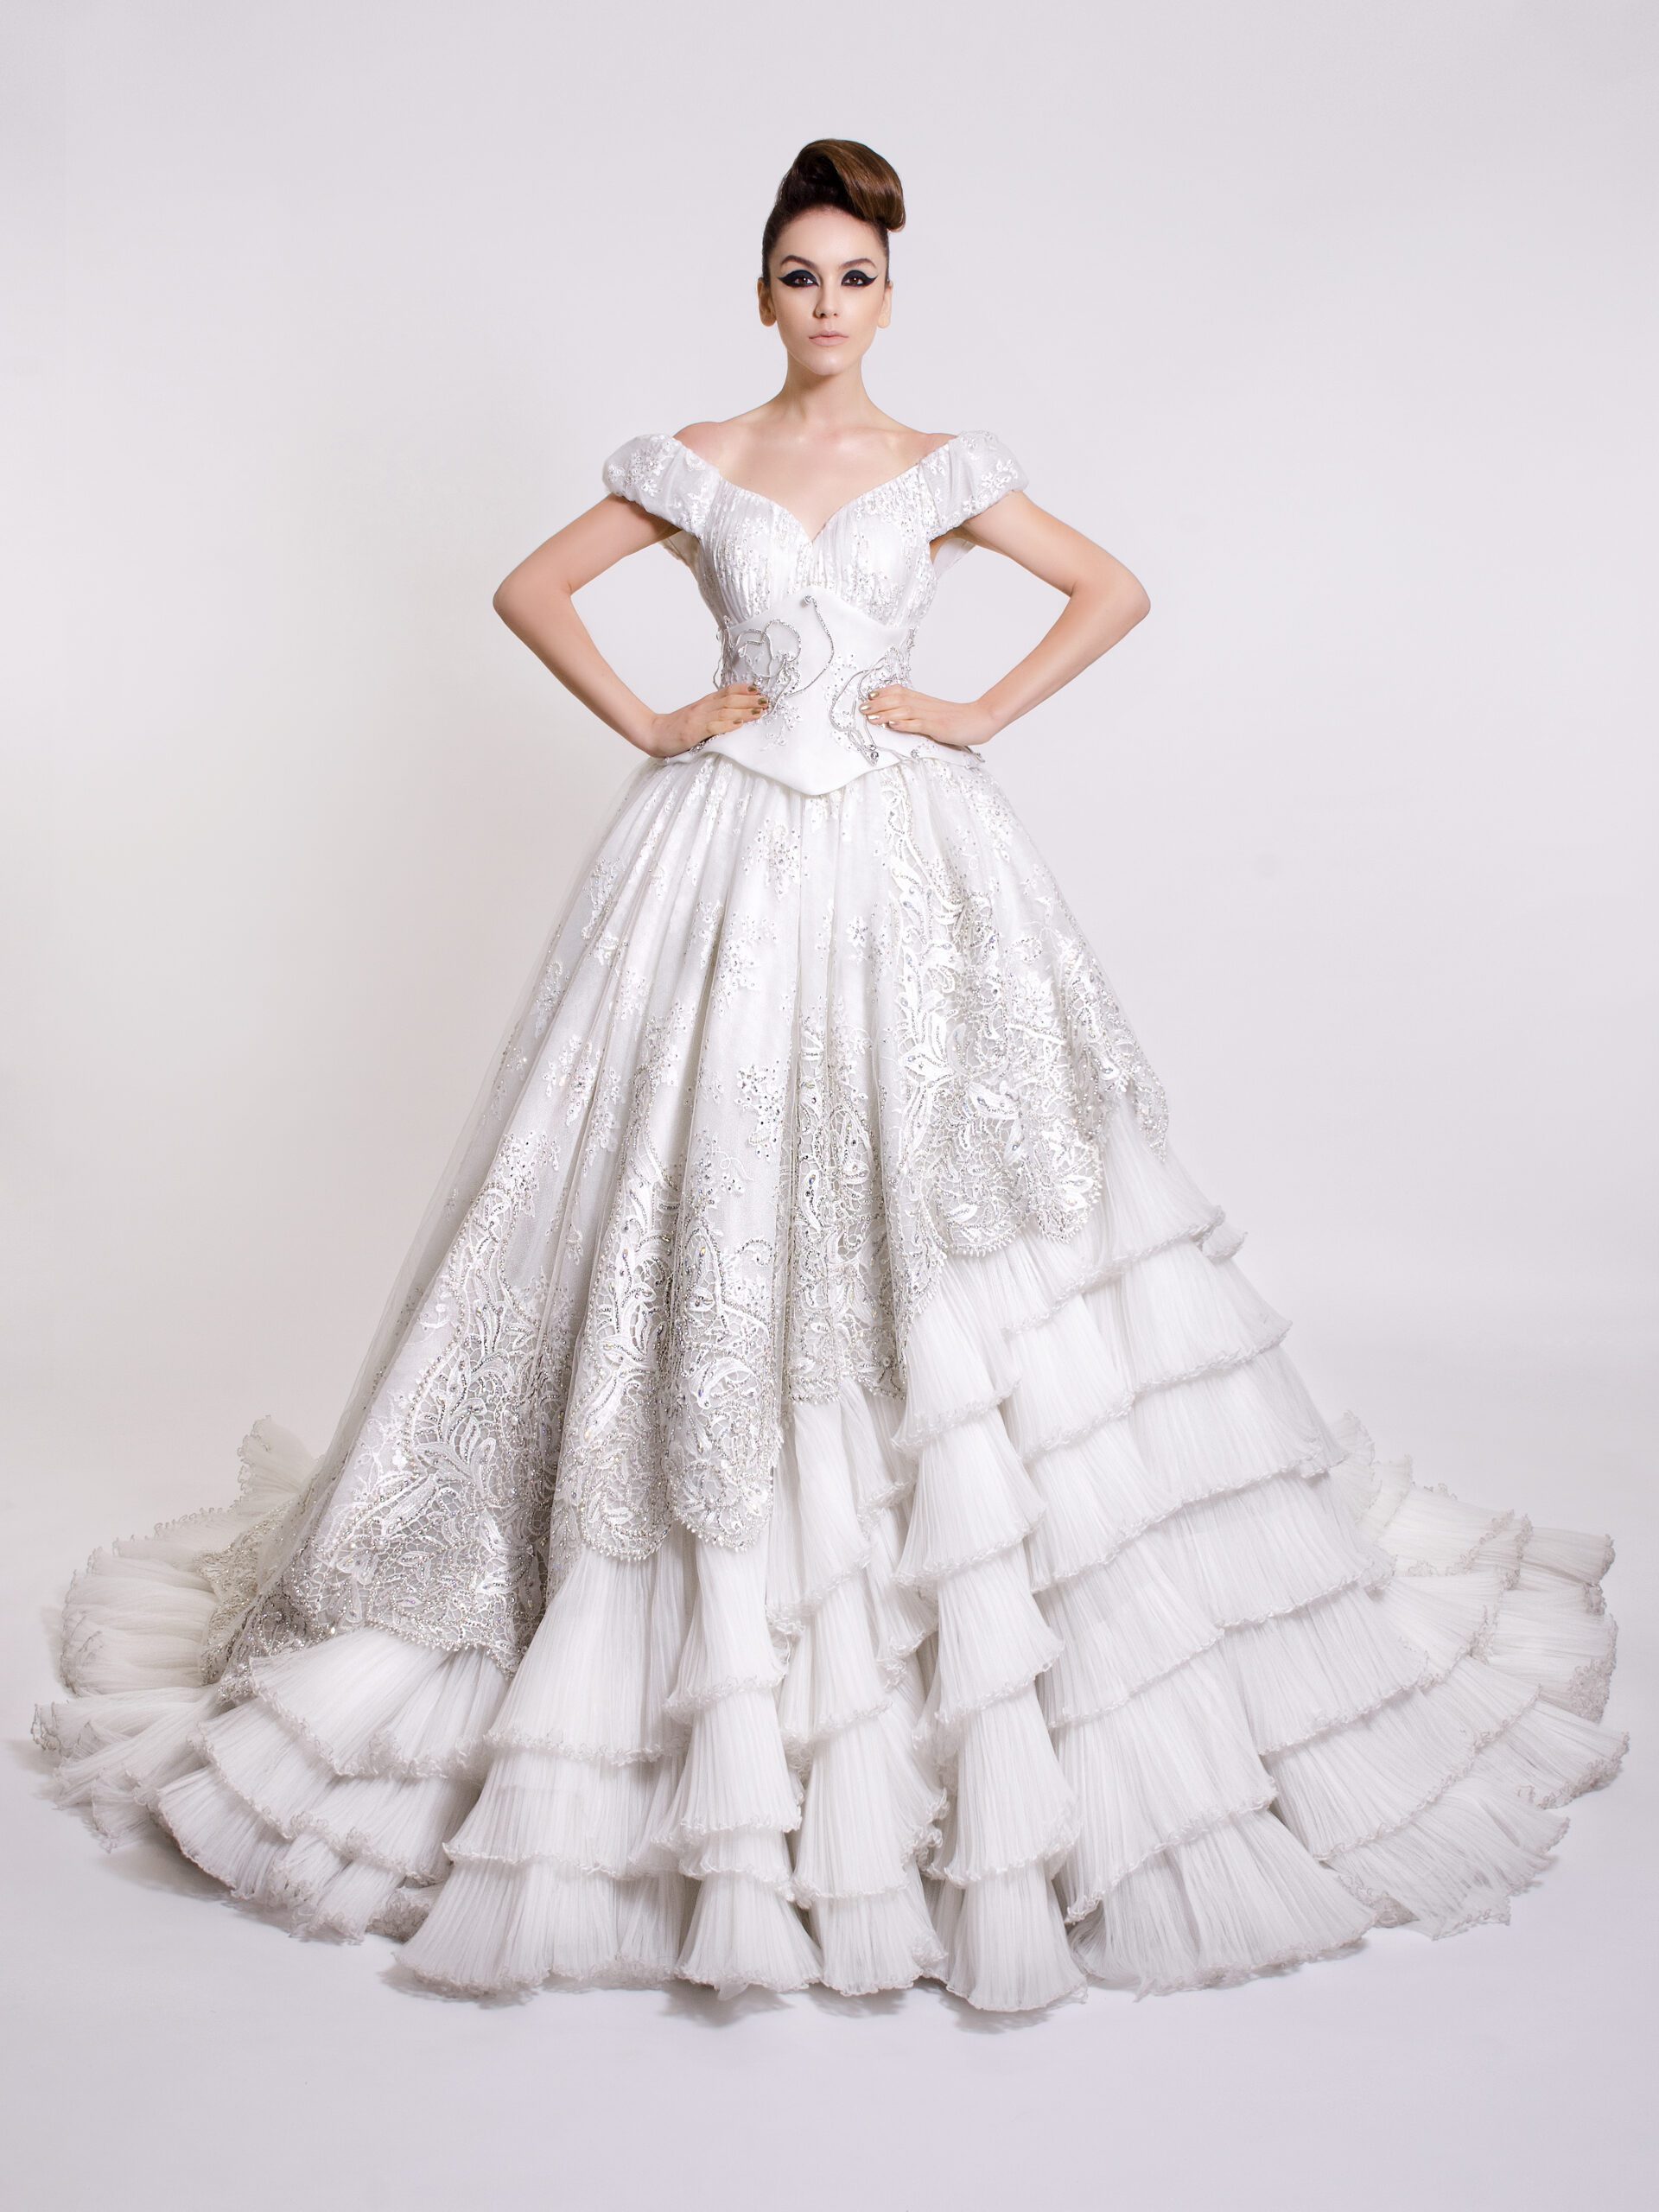 fashion atelier by darsara DSC 1852f 2 scaled Stunning bridal and wedding dresses available for rental in Dubai, UAE